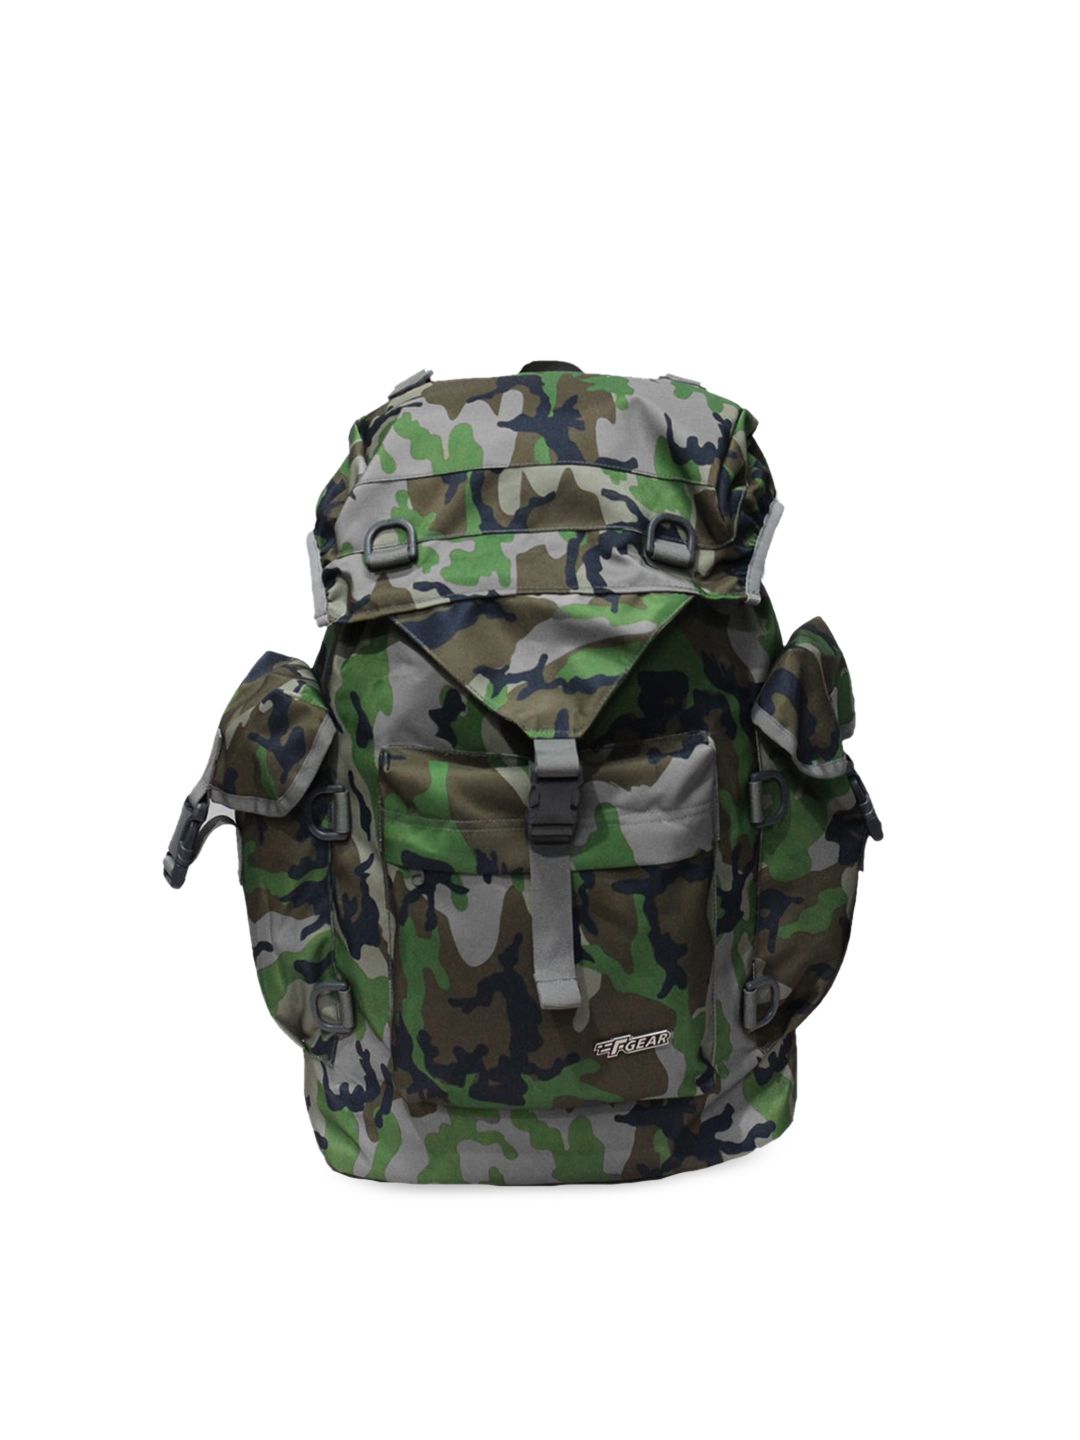 F Gear Unisex Olive Green & Grey Camouflage Backpack Price in India